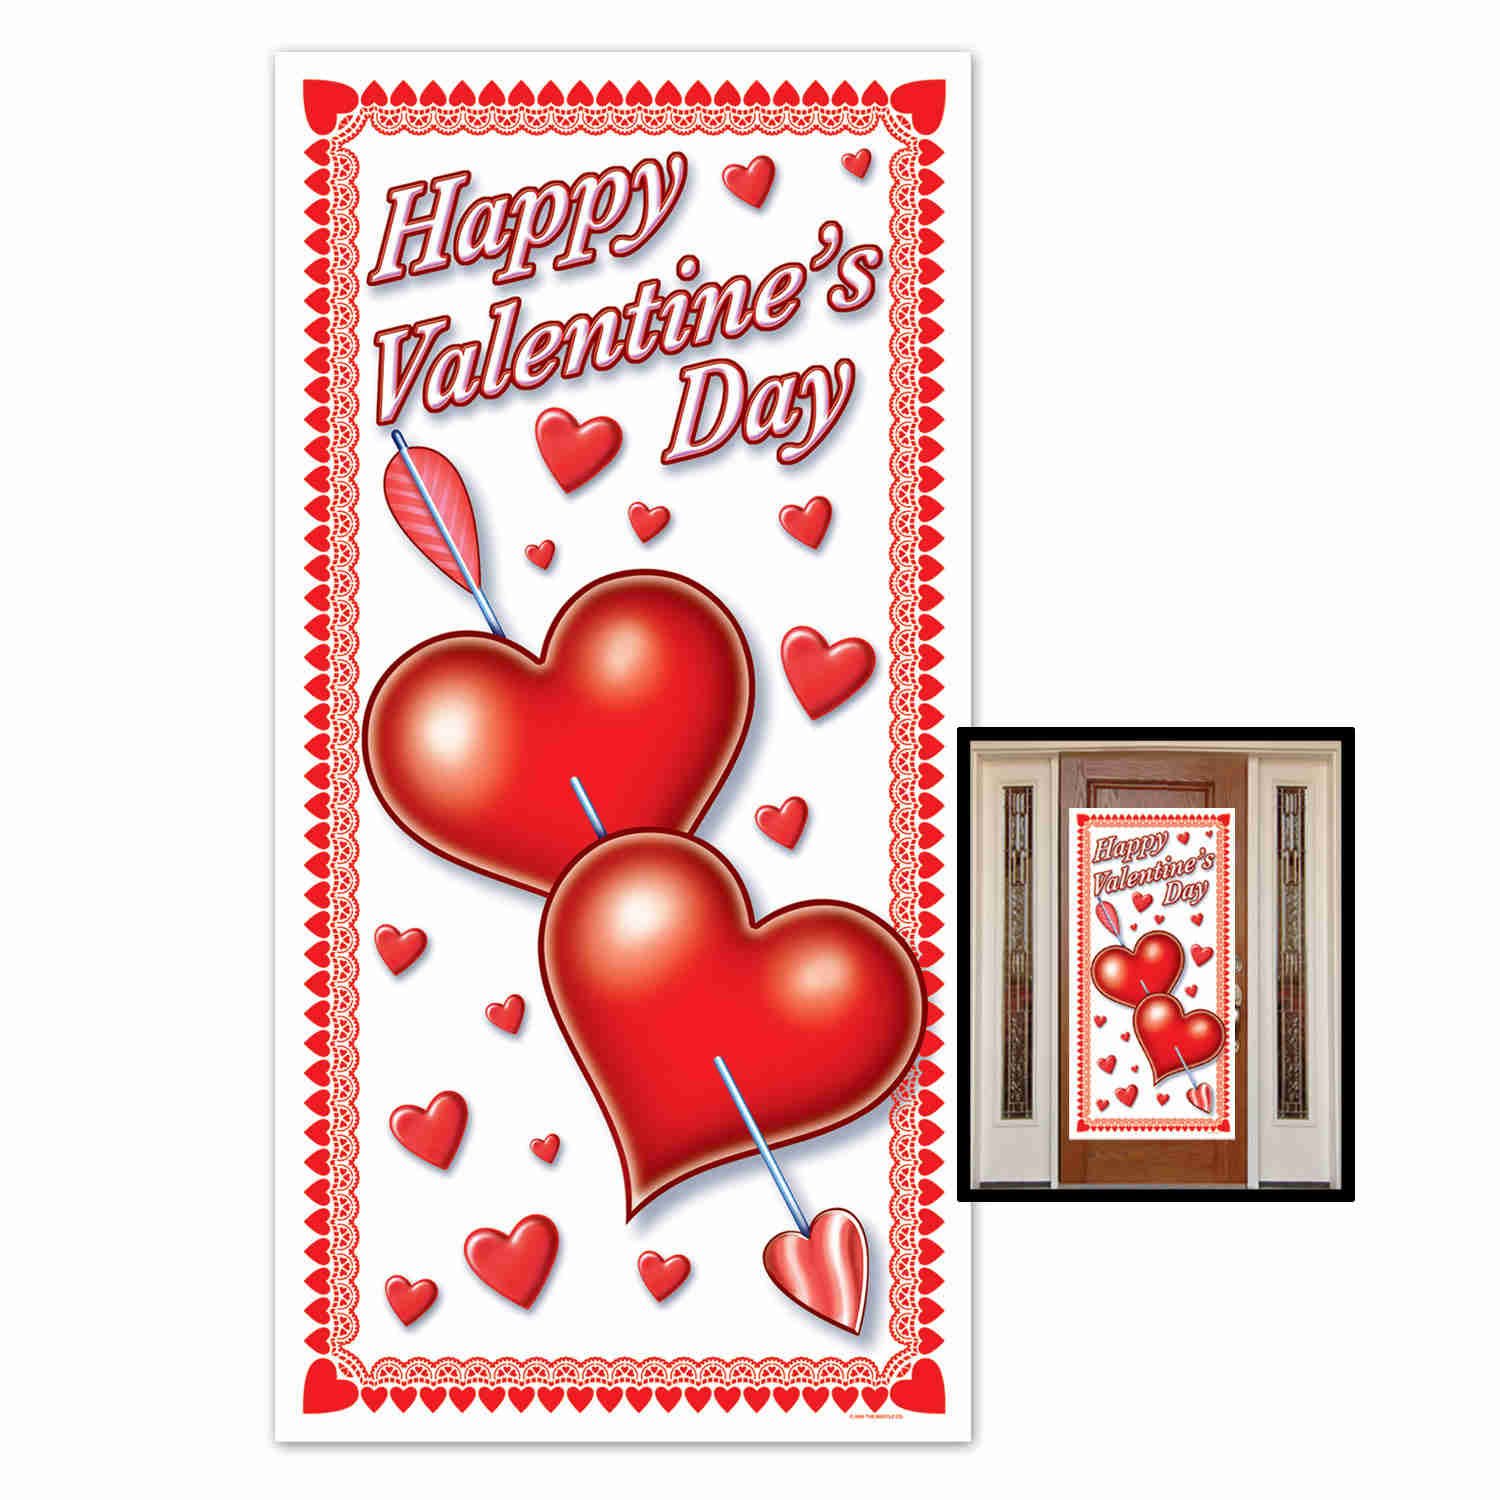 Valentines Day Door Cover with an arrow being shot through multiple red hearts